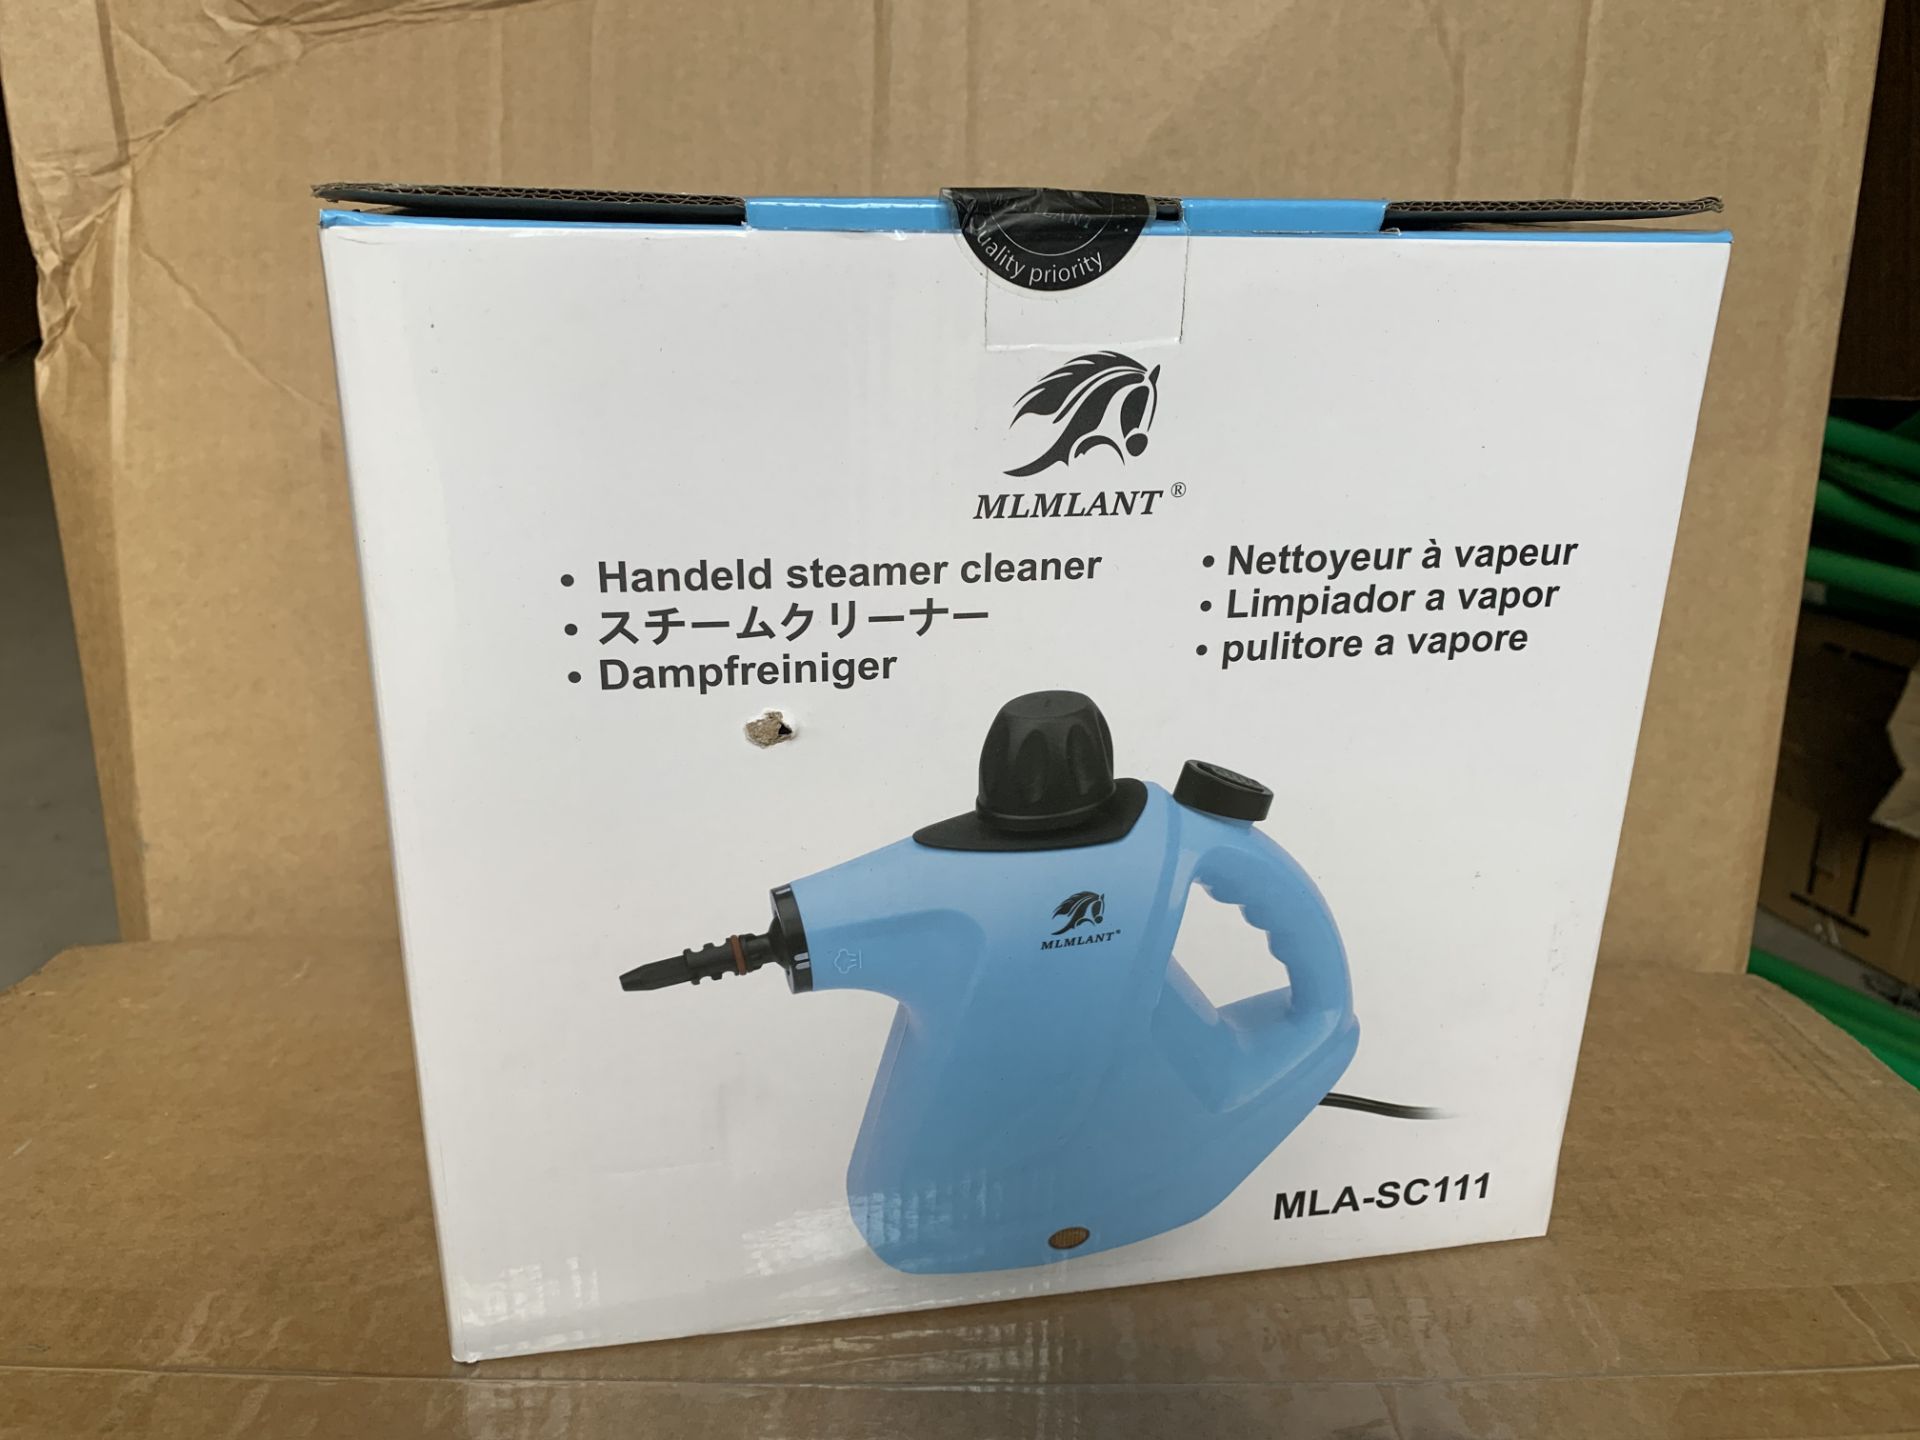 6 X BRAND NEW HANDHELD STEAMER CLEANERS